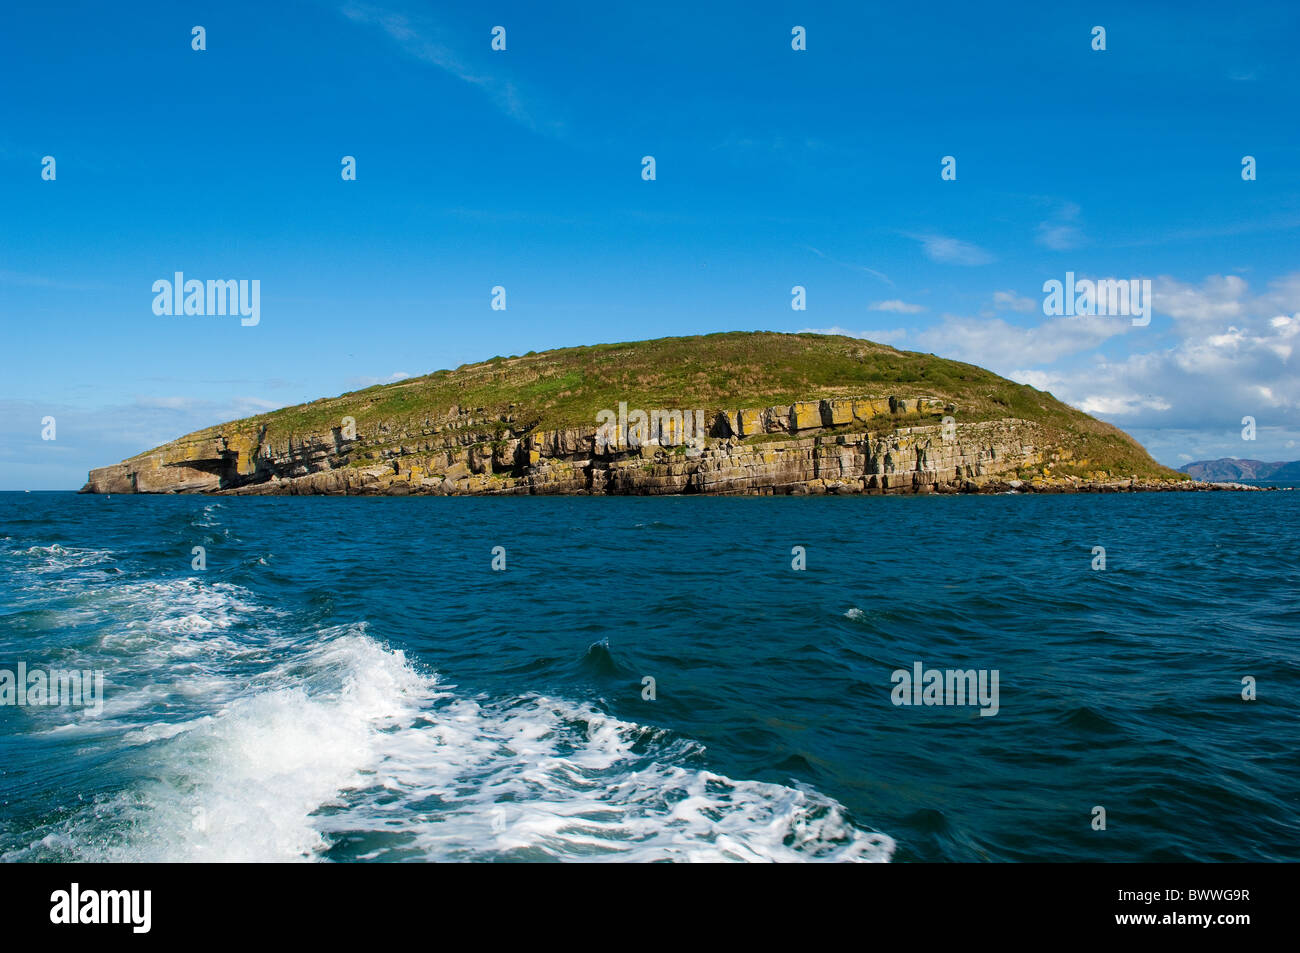 Puffin Island an uninhabited island off Anglesey, Wales. A protected sea bird colony  viewed from boat trips. Stock Photo